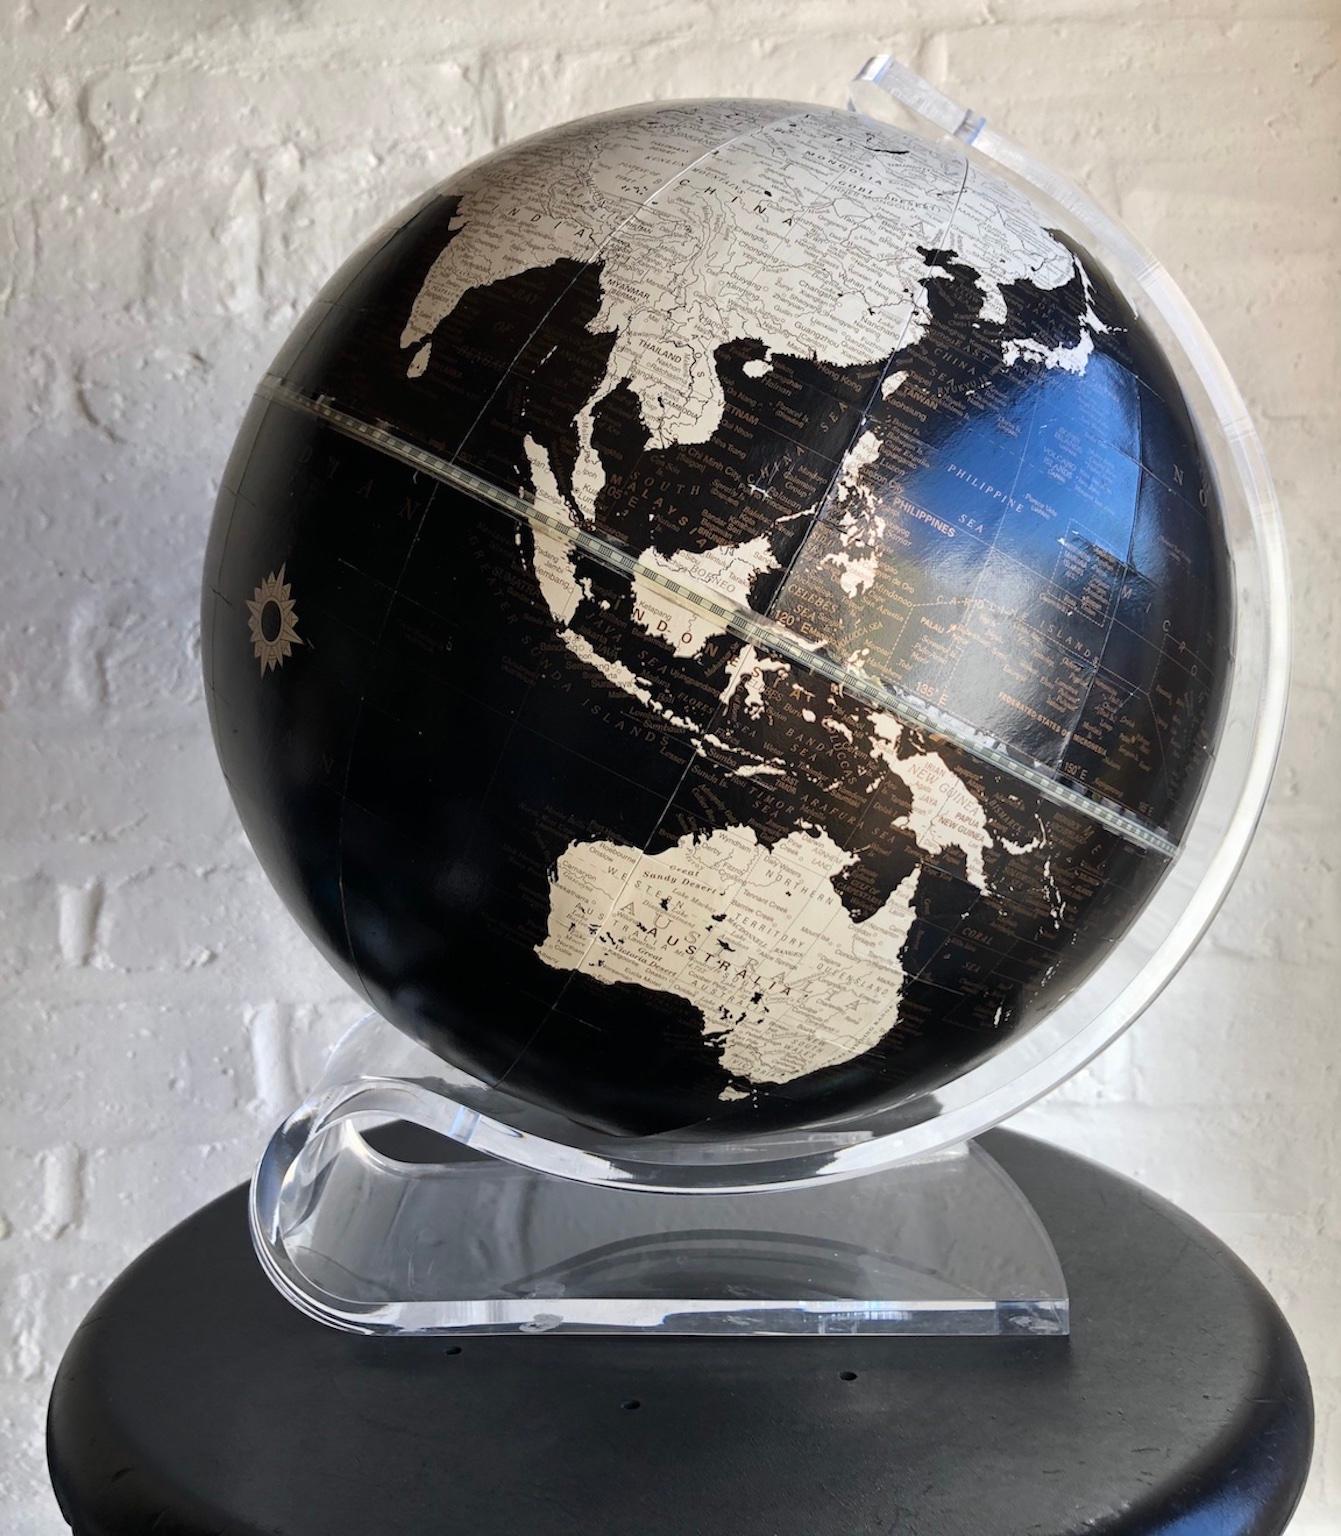 Mid-Century Modern black and white world globe with Lucite stand by George F. Cram, 1970s

‘Imperial Globe’ globe on Lucite stand by George F Cram Company. Unique chic black and white with hint of gold accents.

There is some minor wear and tear